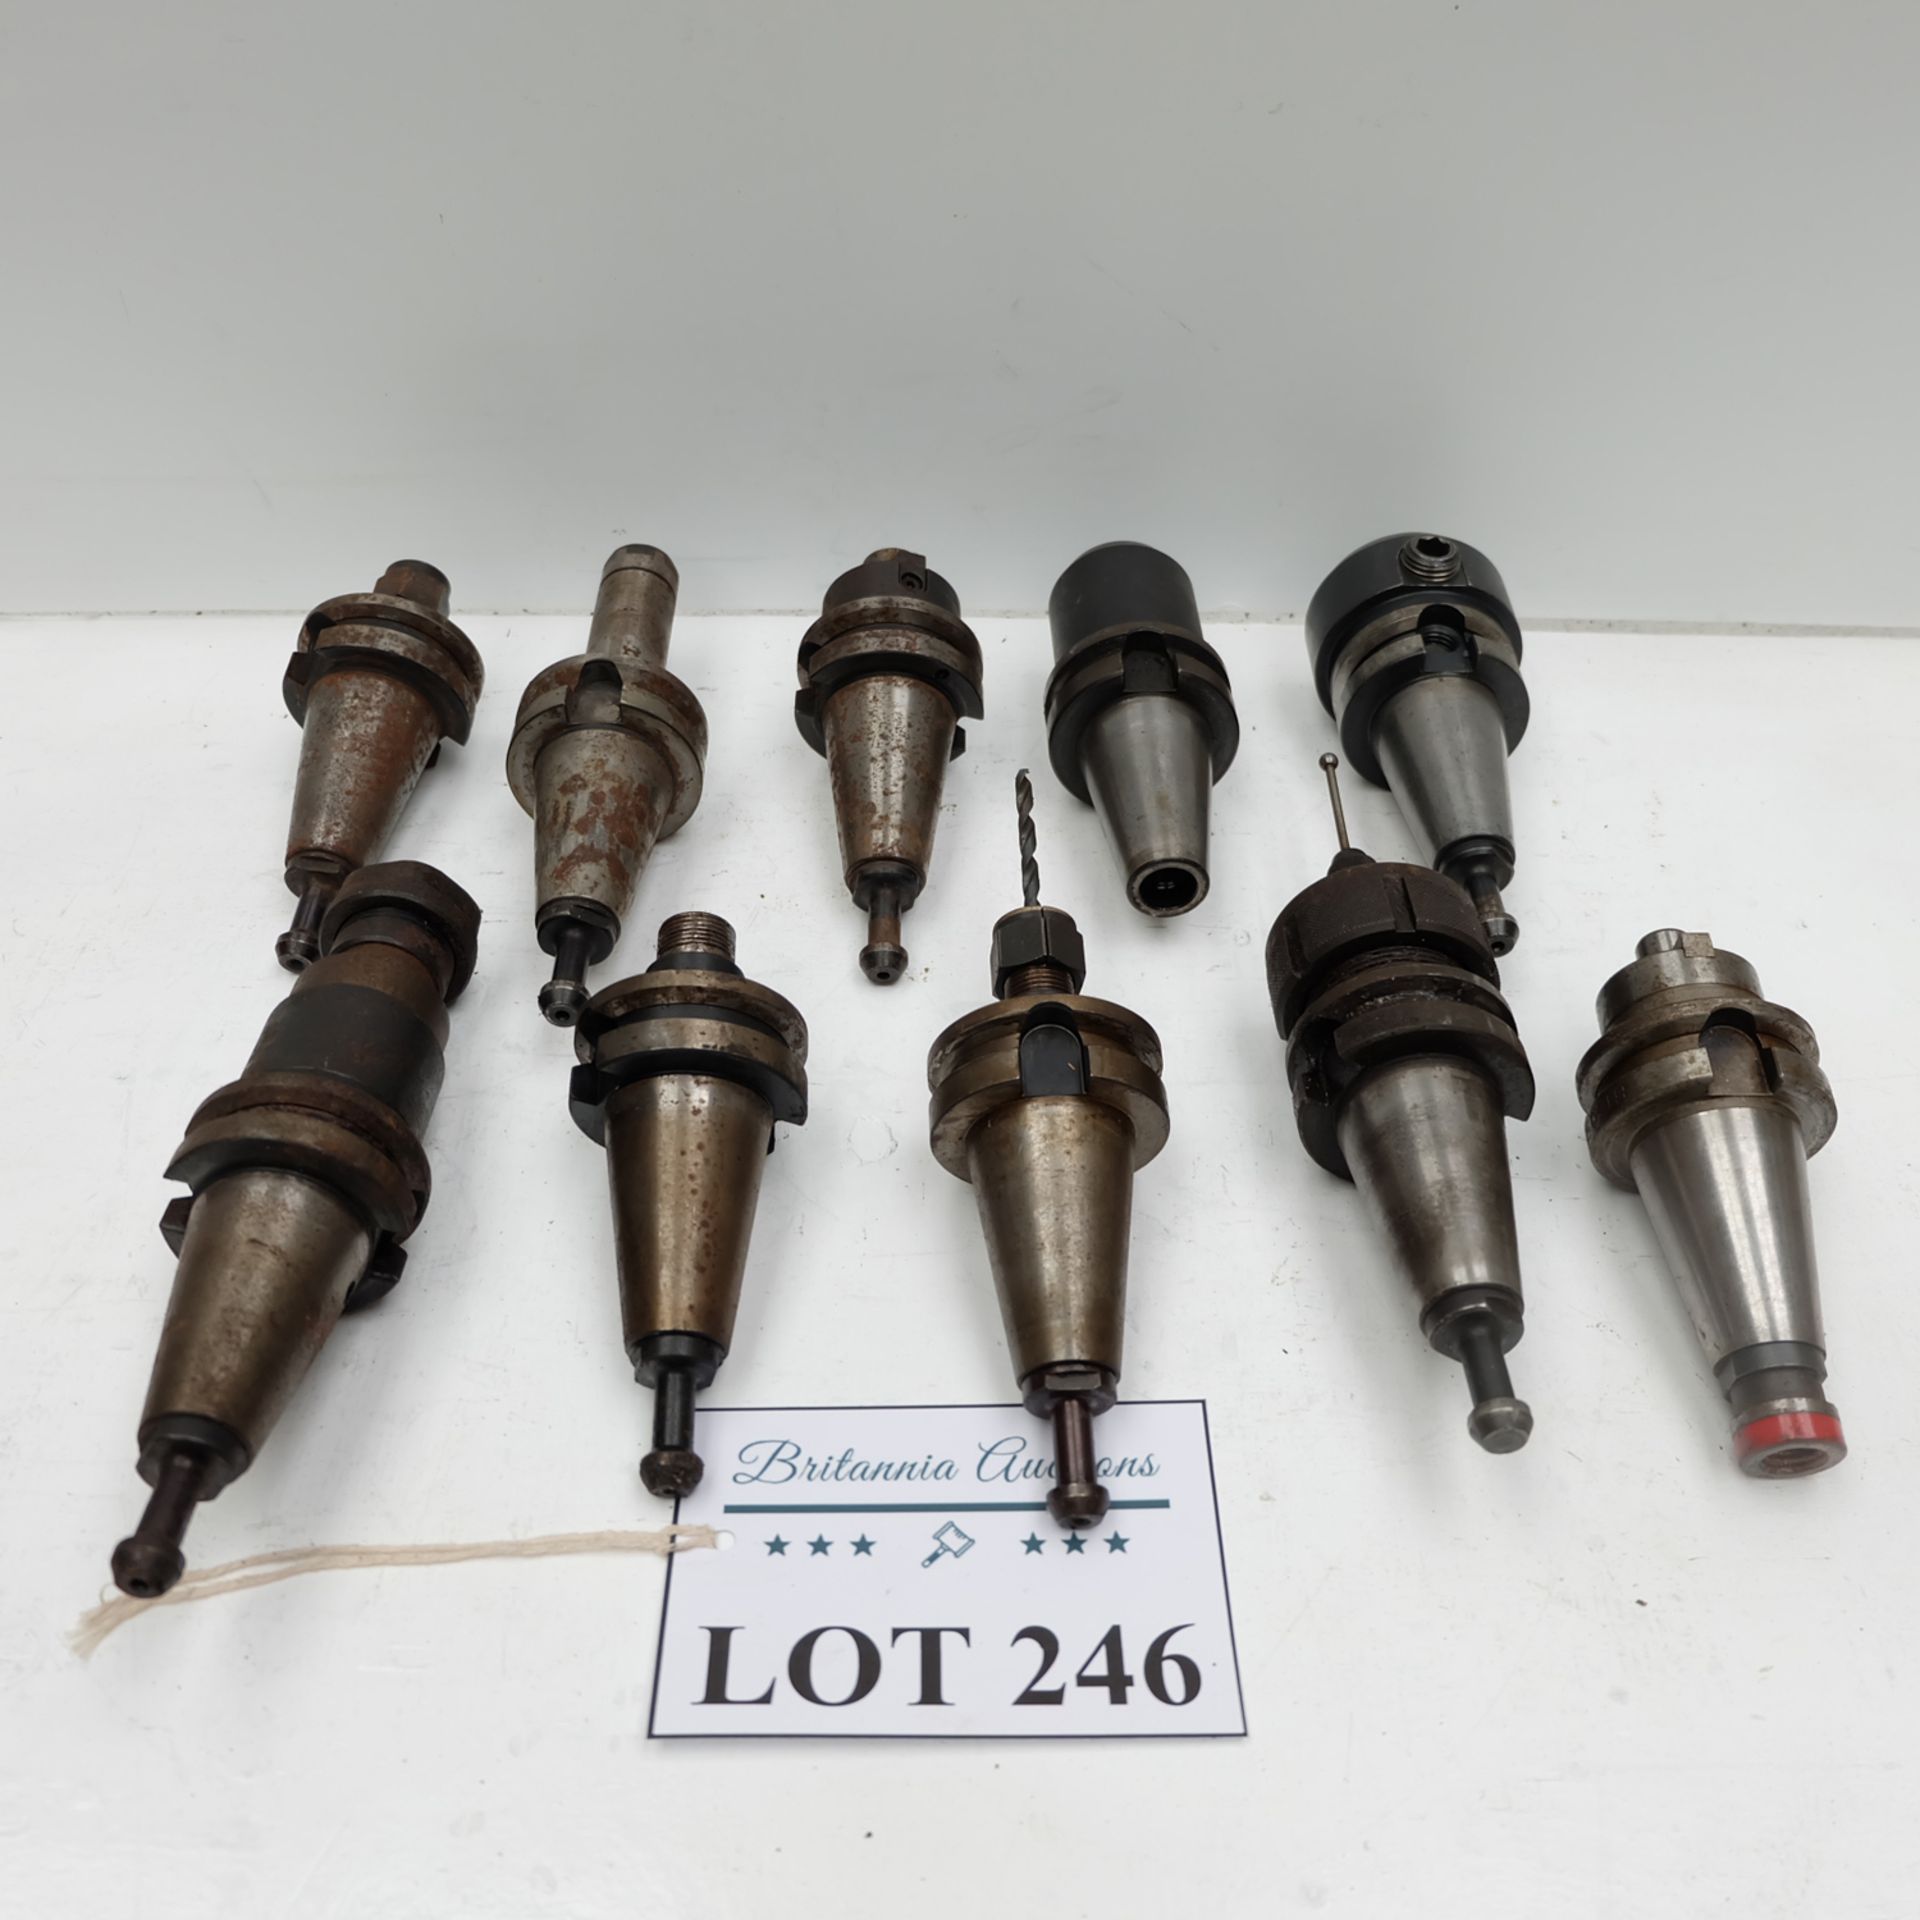 Quantity of 10 x BT 40 Spindle Tooling.